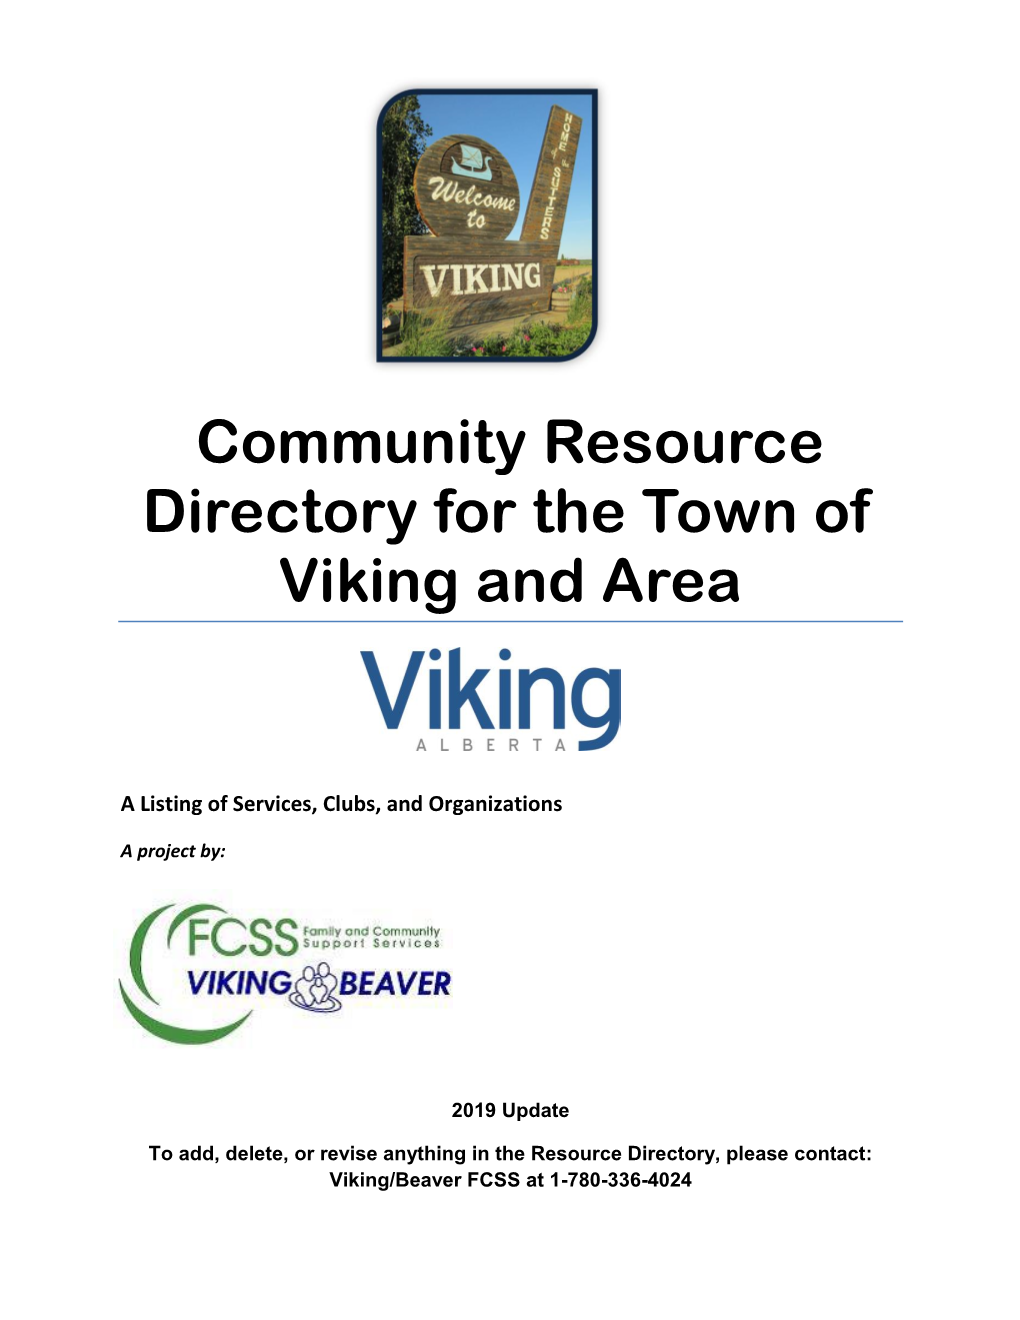 Community Resource Directory for the Town of Viking and Area